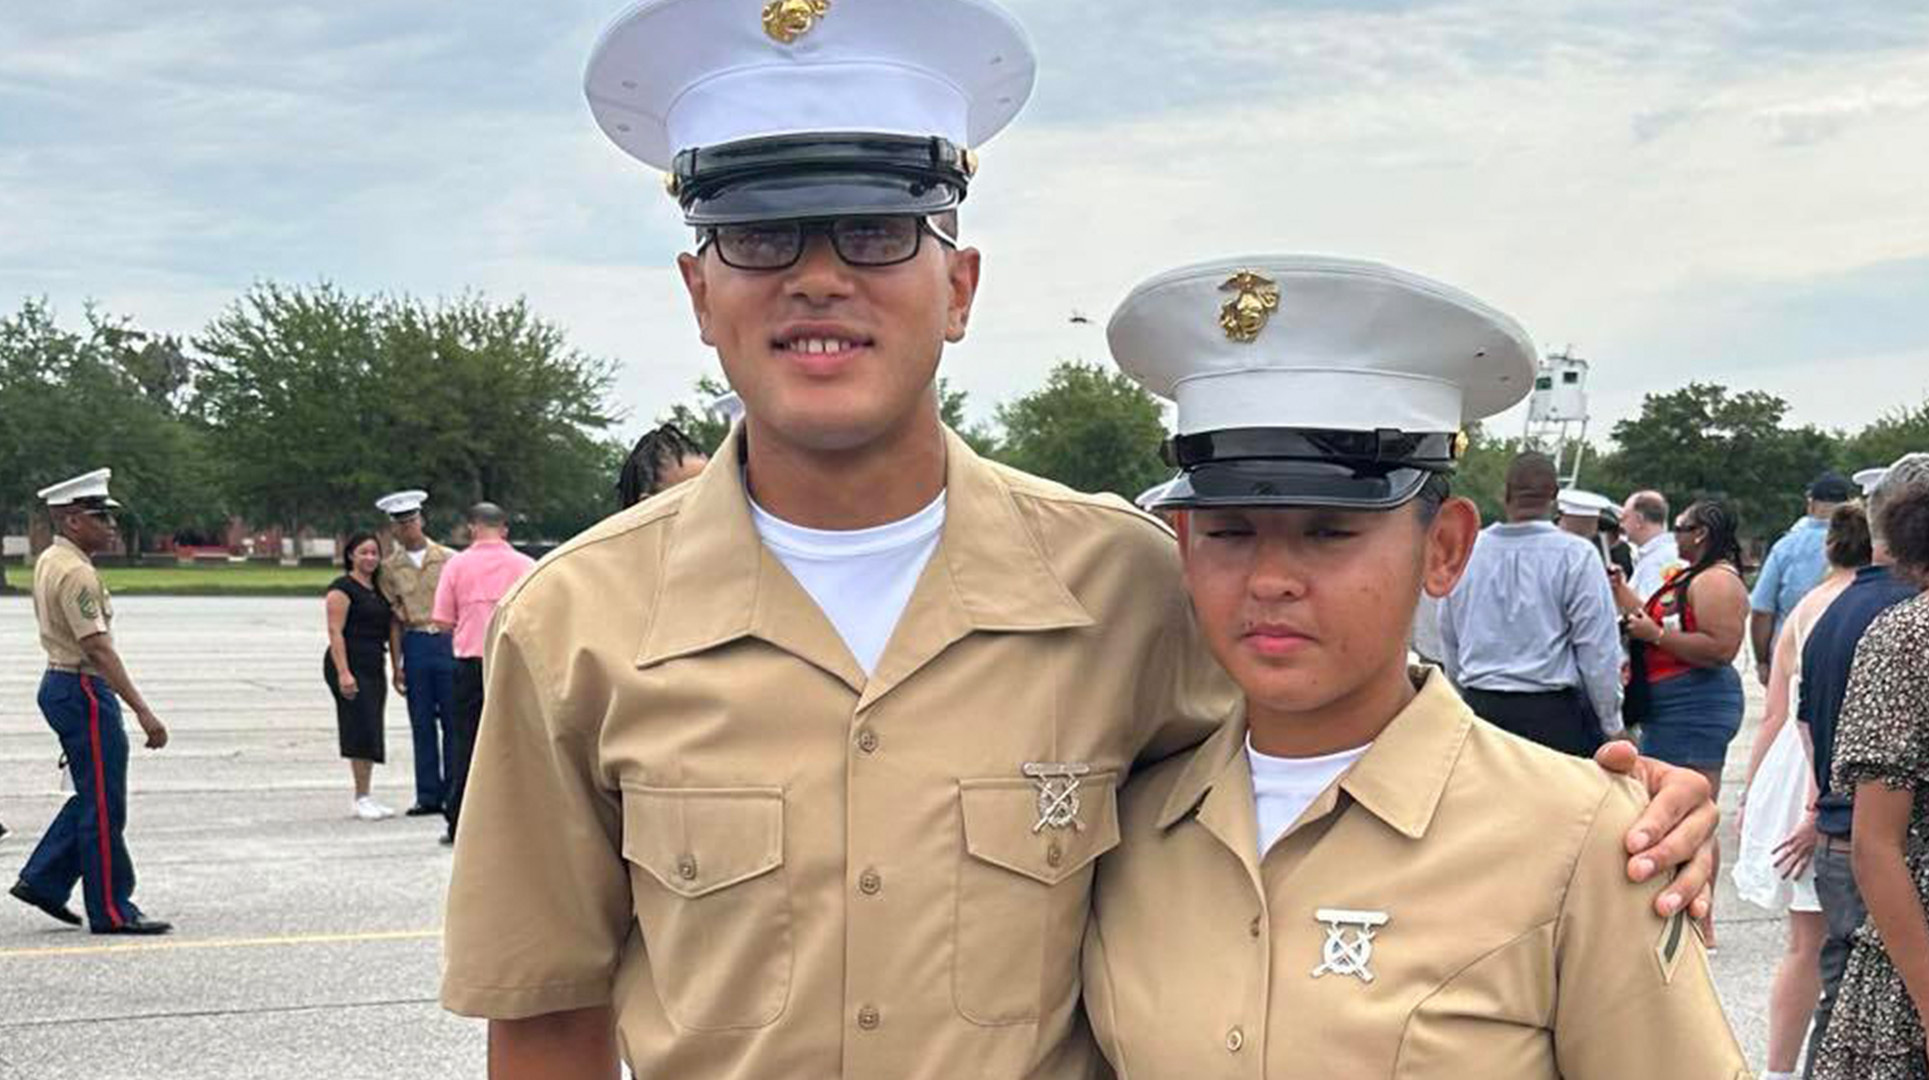 Marine Corps privates JuliMarie Winston and Jamil Winston Jr. attended boot camp at Marine Recruit Training Depot Parris Island at the same time.